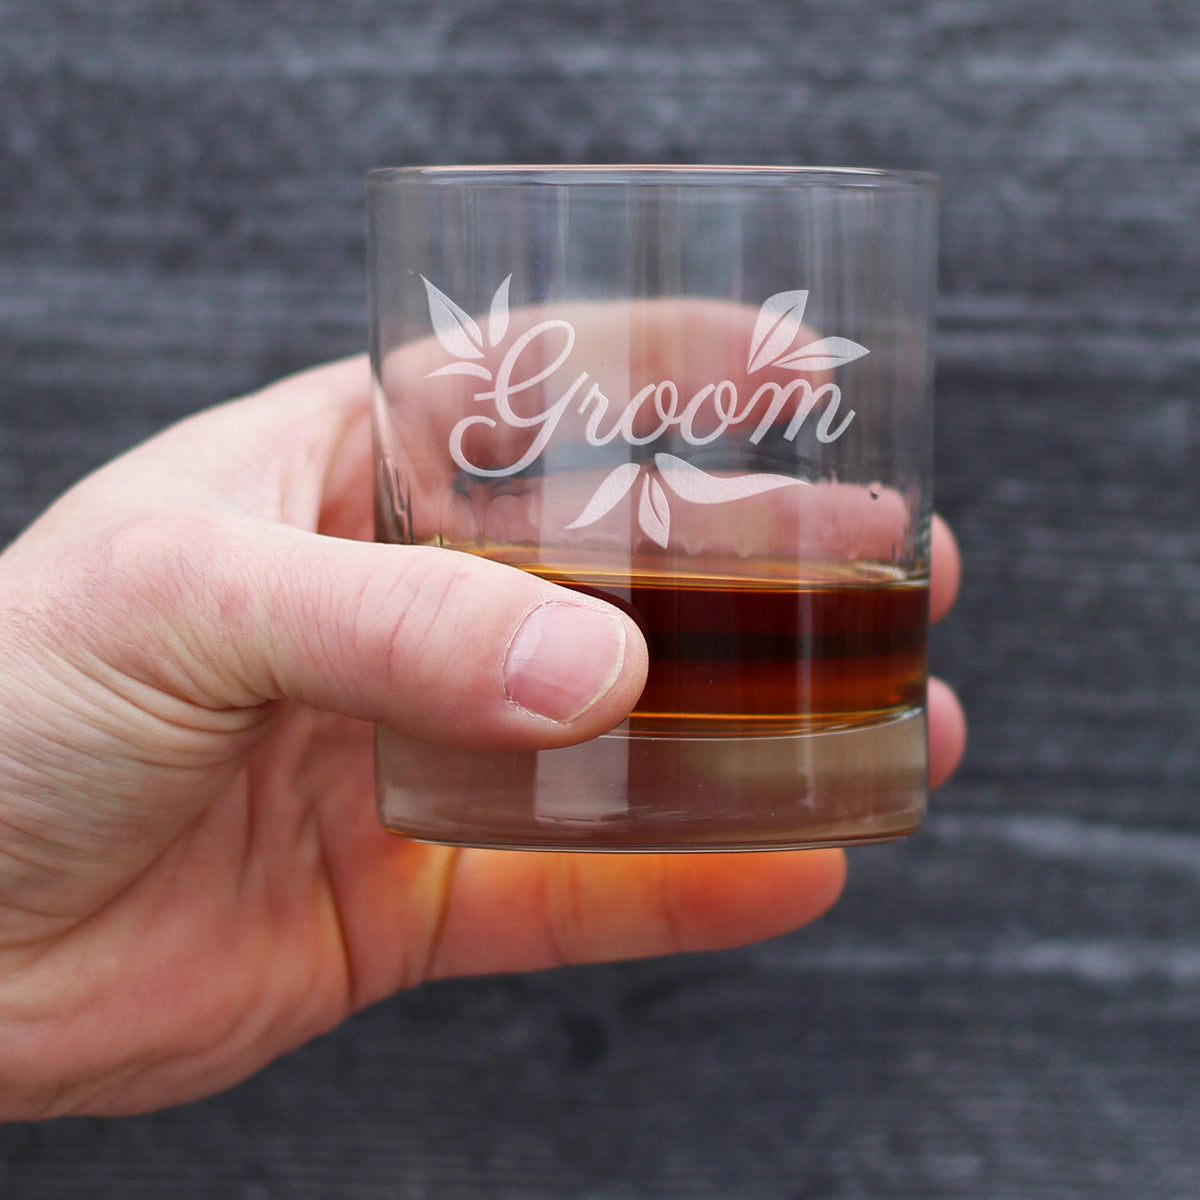 Groom Old Fashioned Rocks Glass - Unique Wedding Gift for Groom - Engraved Wedding Cup Gift